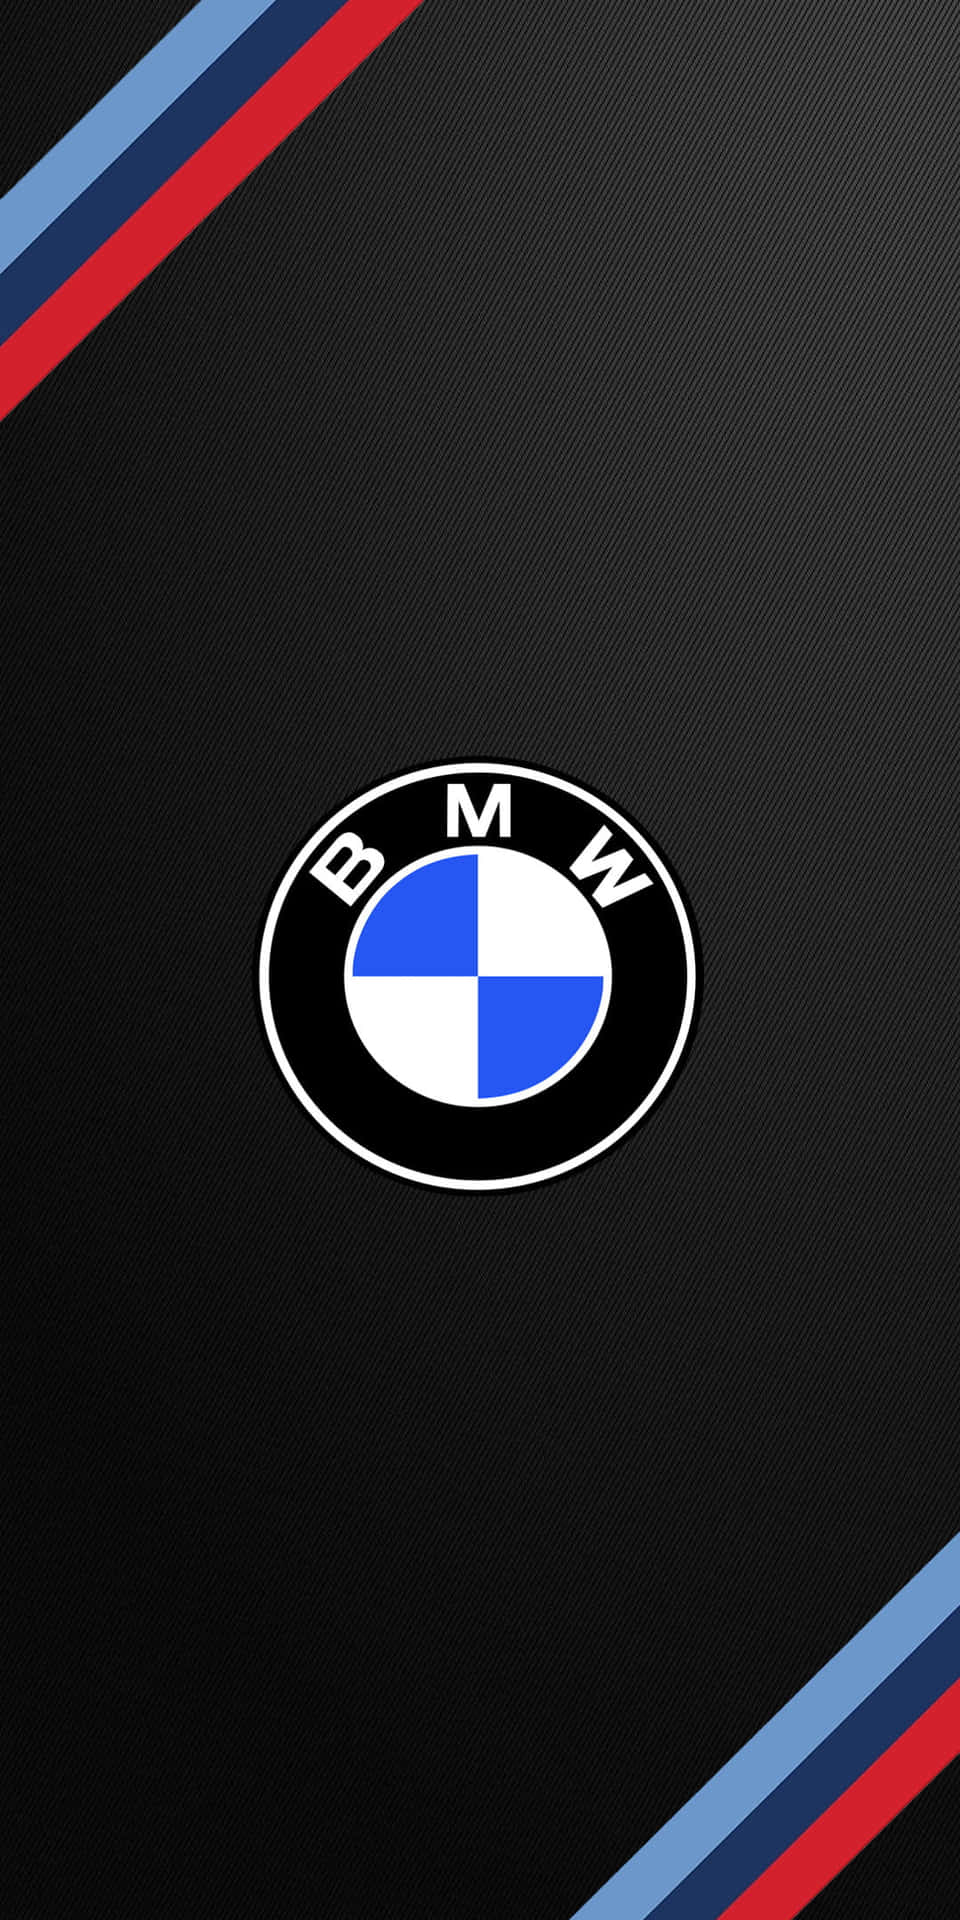 Download BMW Logo in Bright Blue Wallpaper | Wallpapers.com